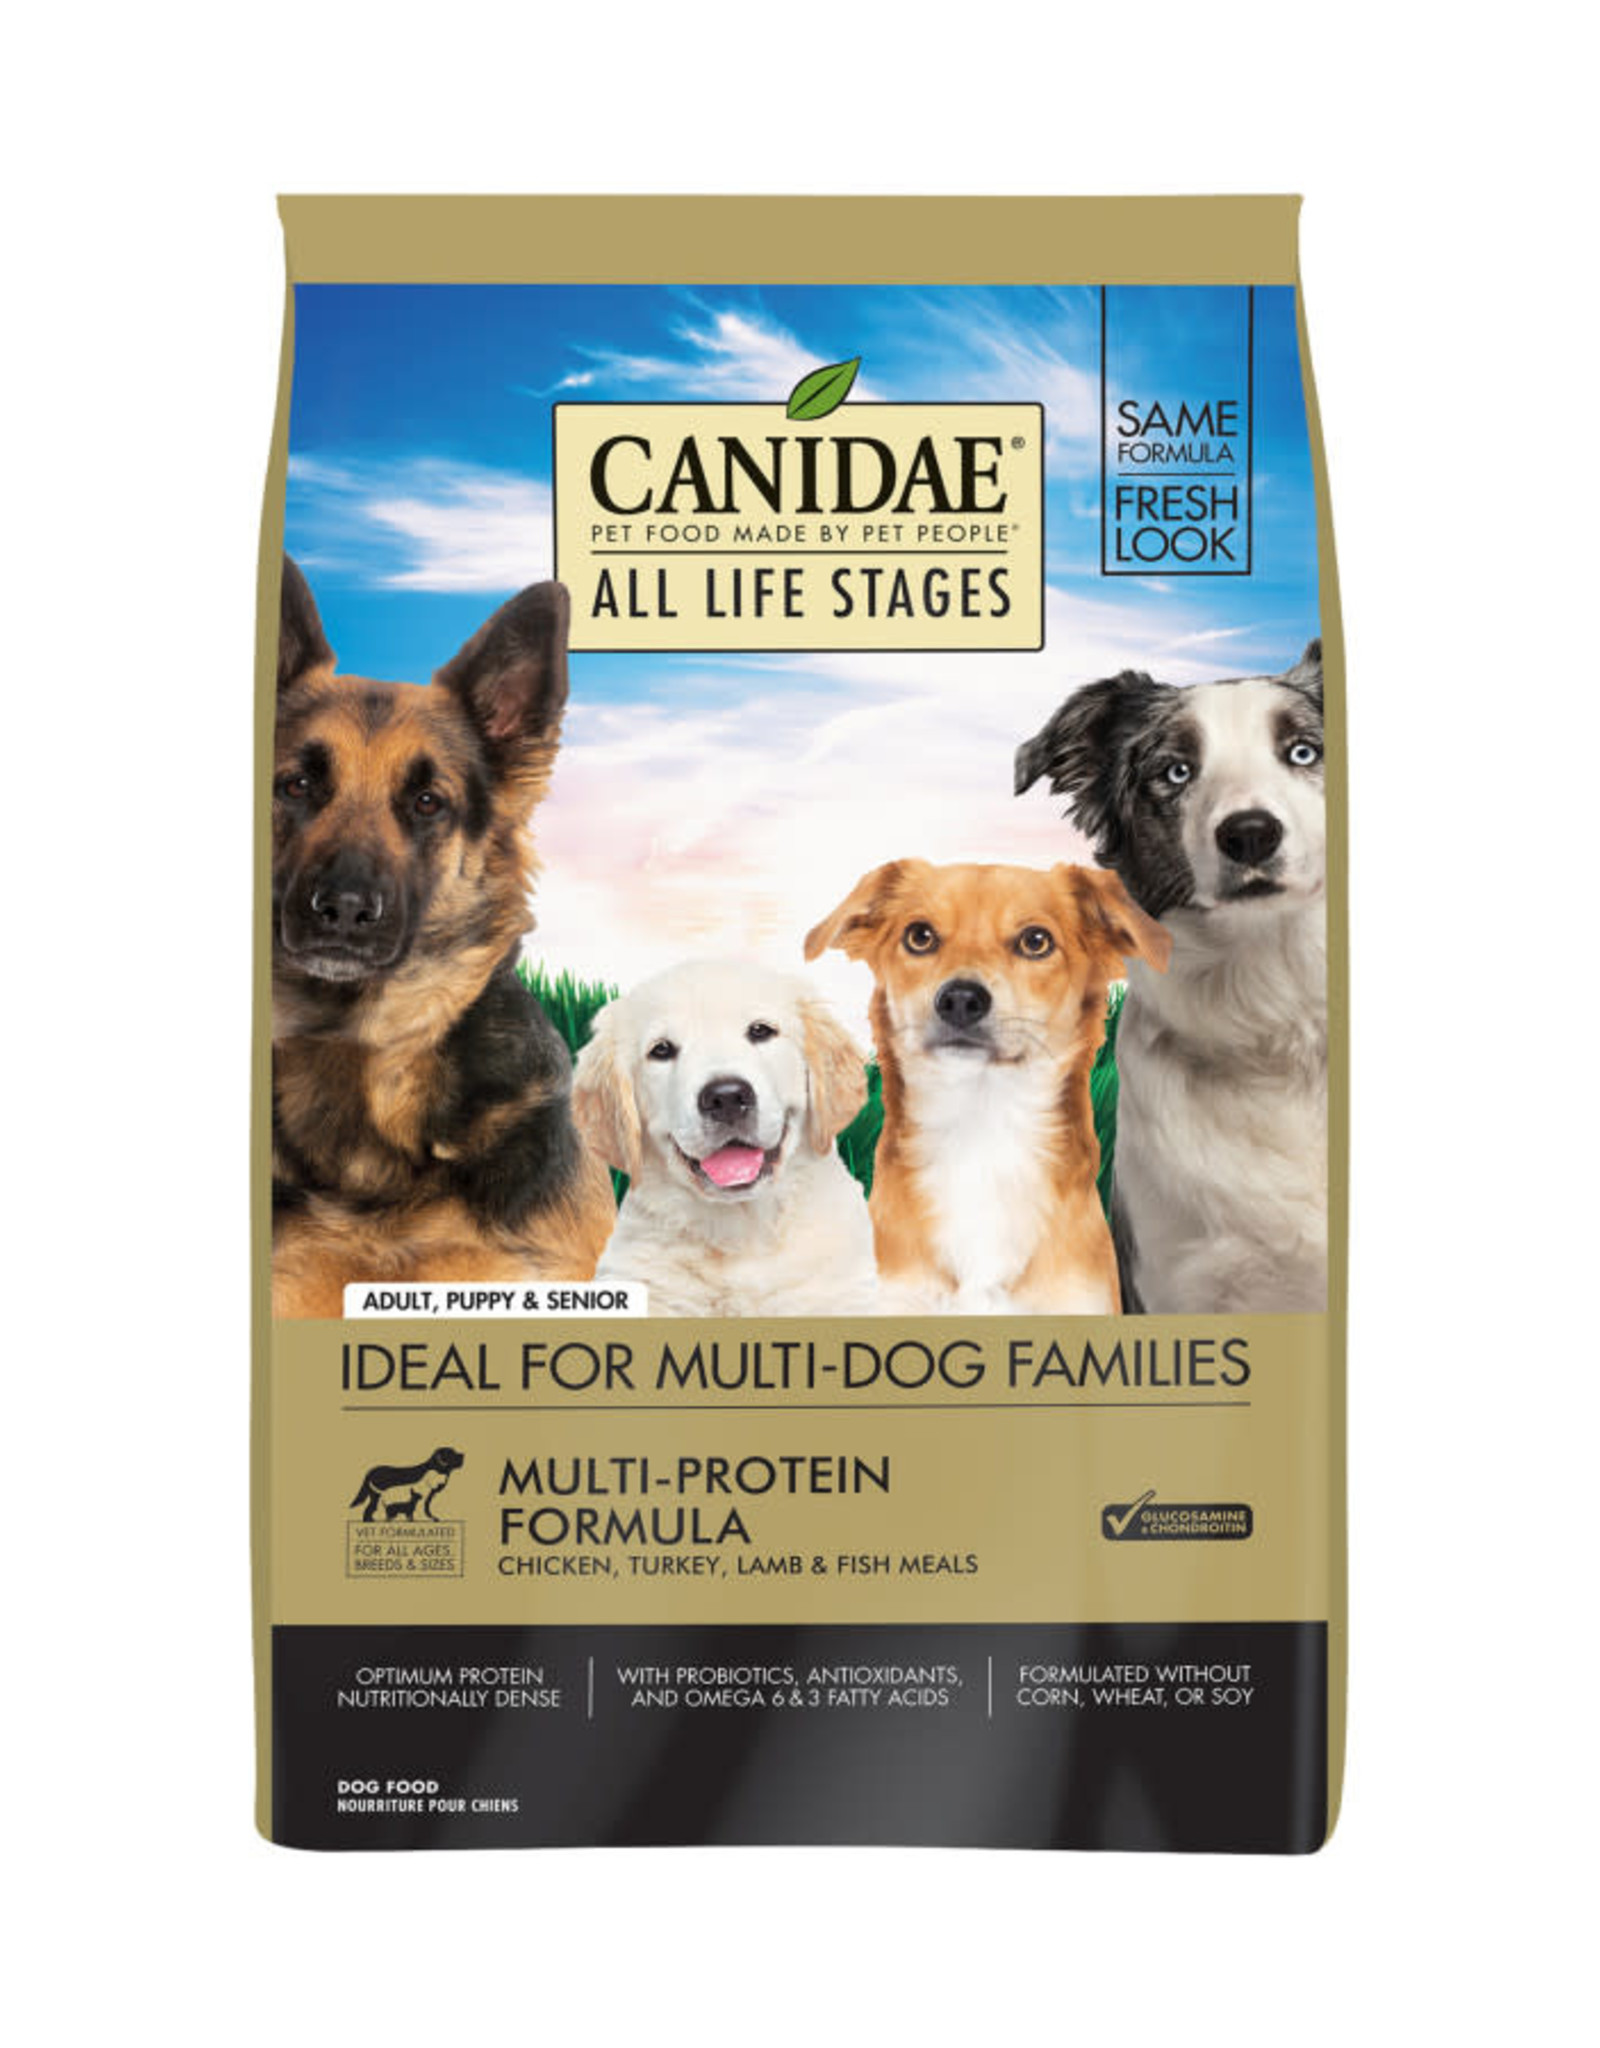 CANIDAE PET FOODS Canidae All Life Stages Dry Dog Food - 44 Lb.